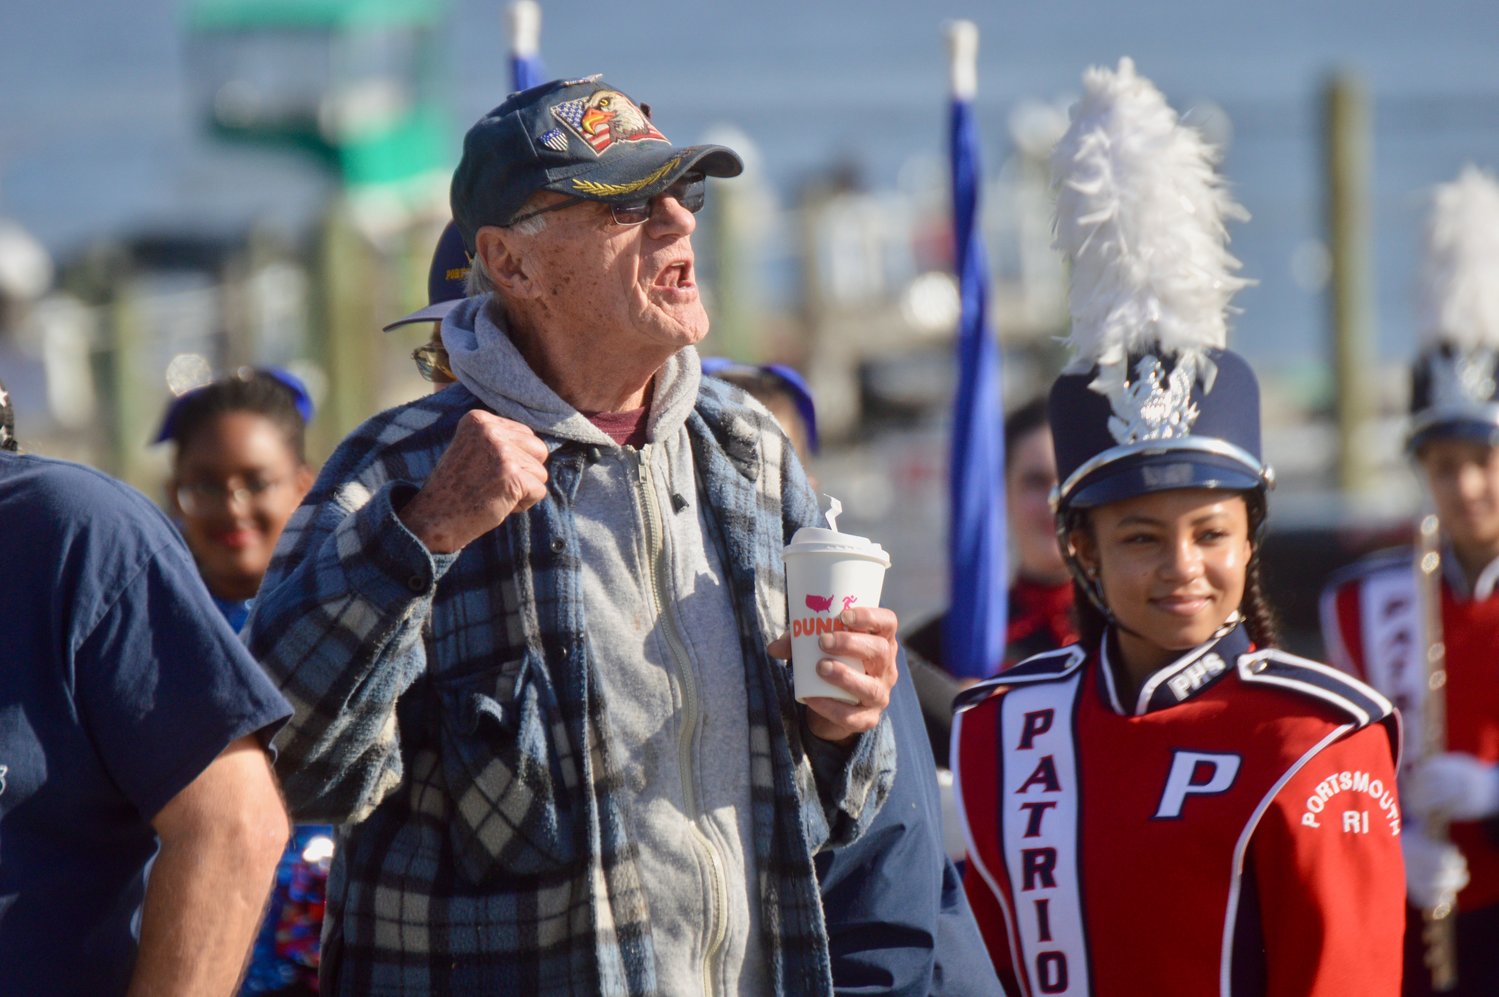 George Cushman, 90, loudly implores fellow veterans to join him in leading a brief parade from Teddy’s Beach to Thriving Tree Coffee House last Thursday. The PHS Marching Band turned out to pay tribute at the Veterans Day event, in which military personnel were offered free food and entertainment at the restaurant.